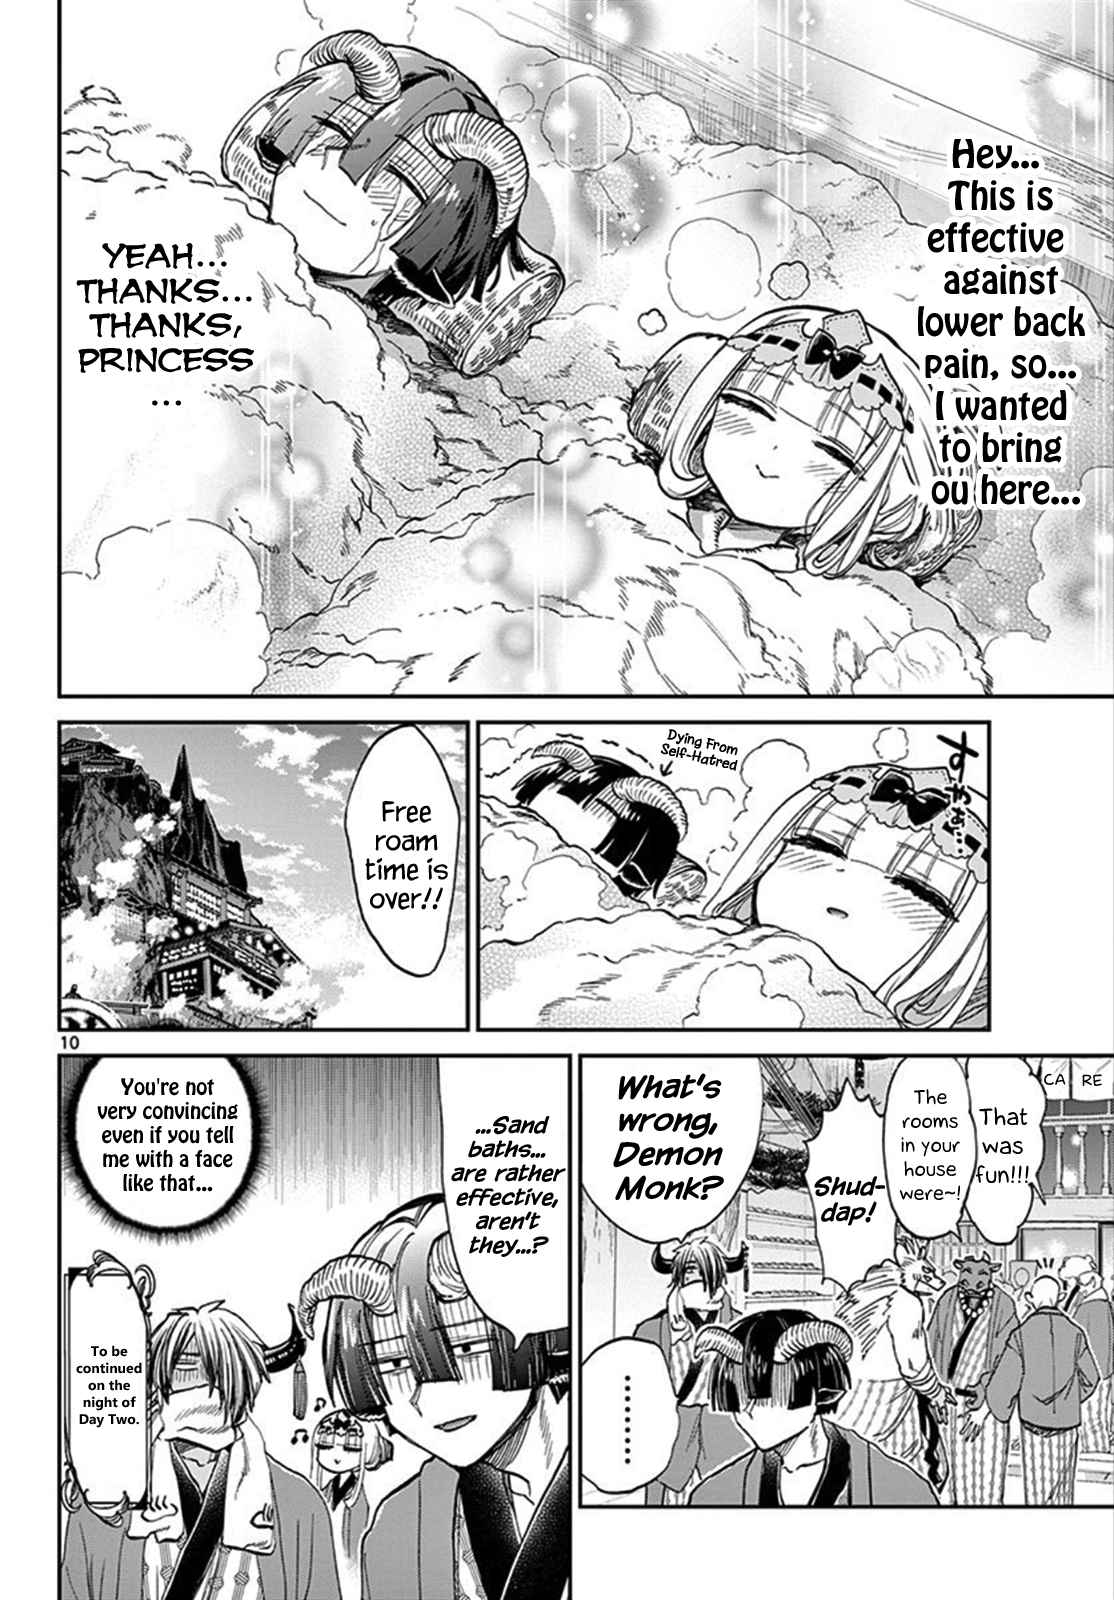 Maou jou de Oyasumi Vol. 8 Ch. 99 Visiting the Nicest Places of Hell Springs Over and Over